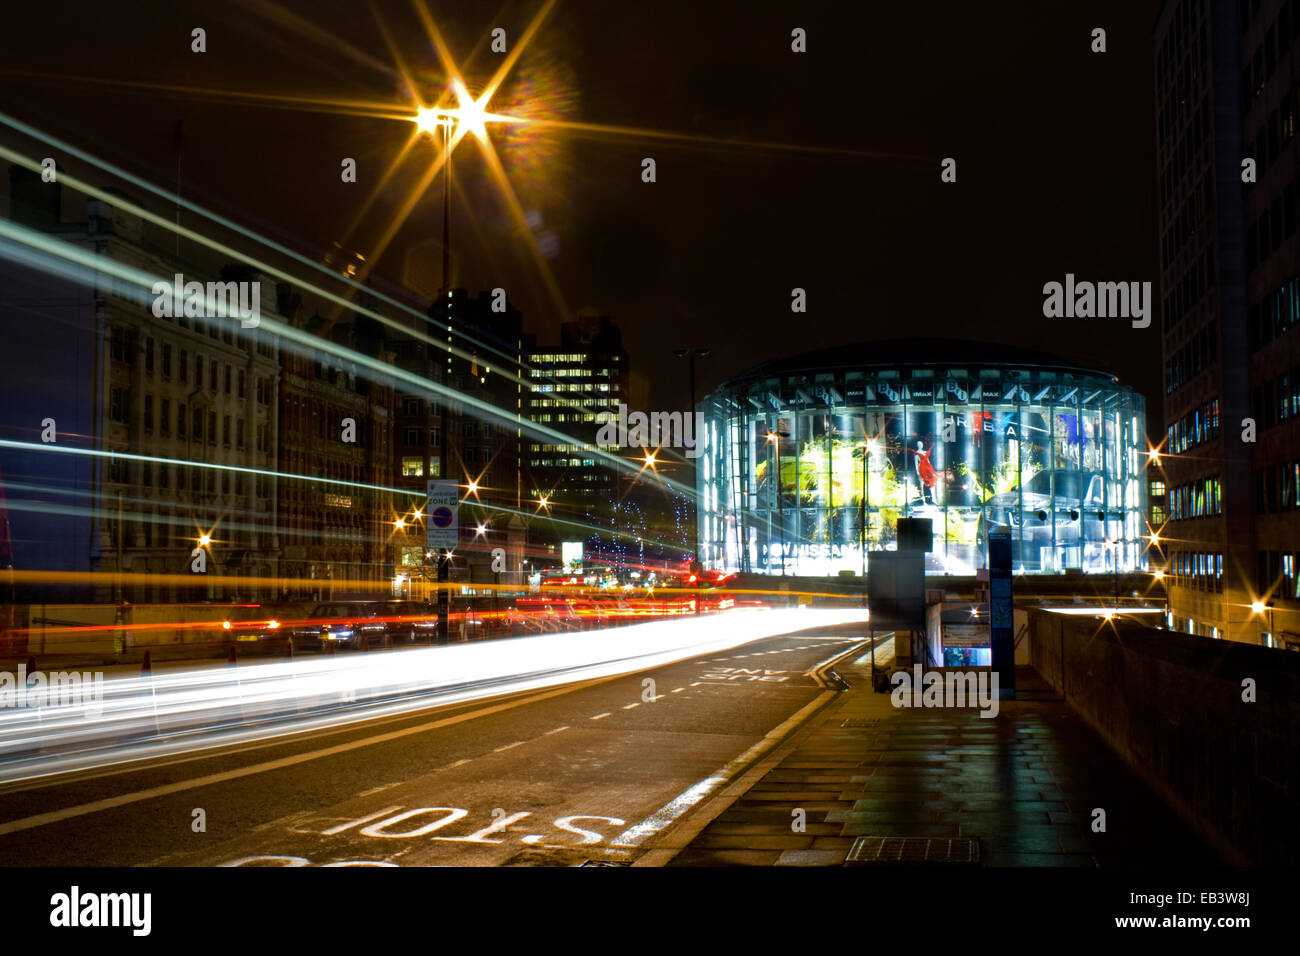 The IMAX Cinema at Waterloo, London at night with light trails Stock Photo